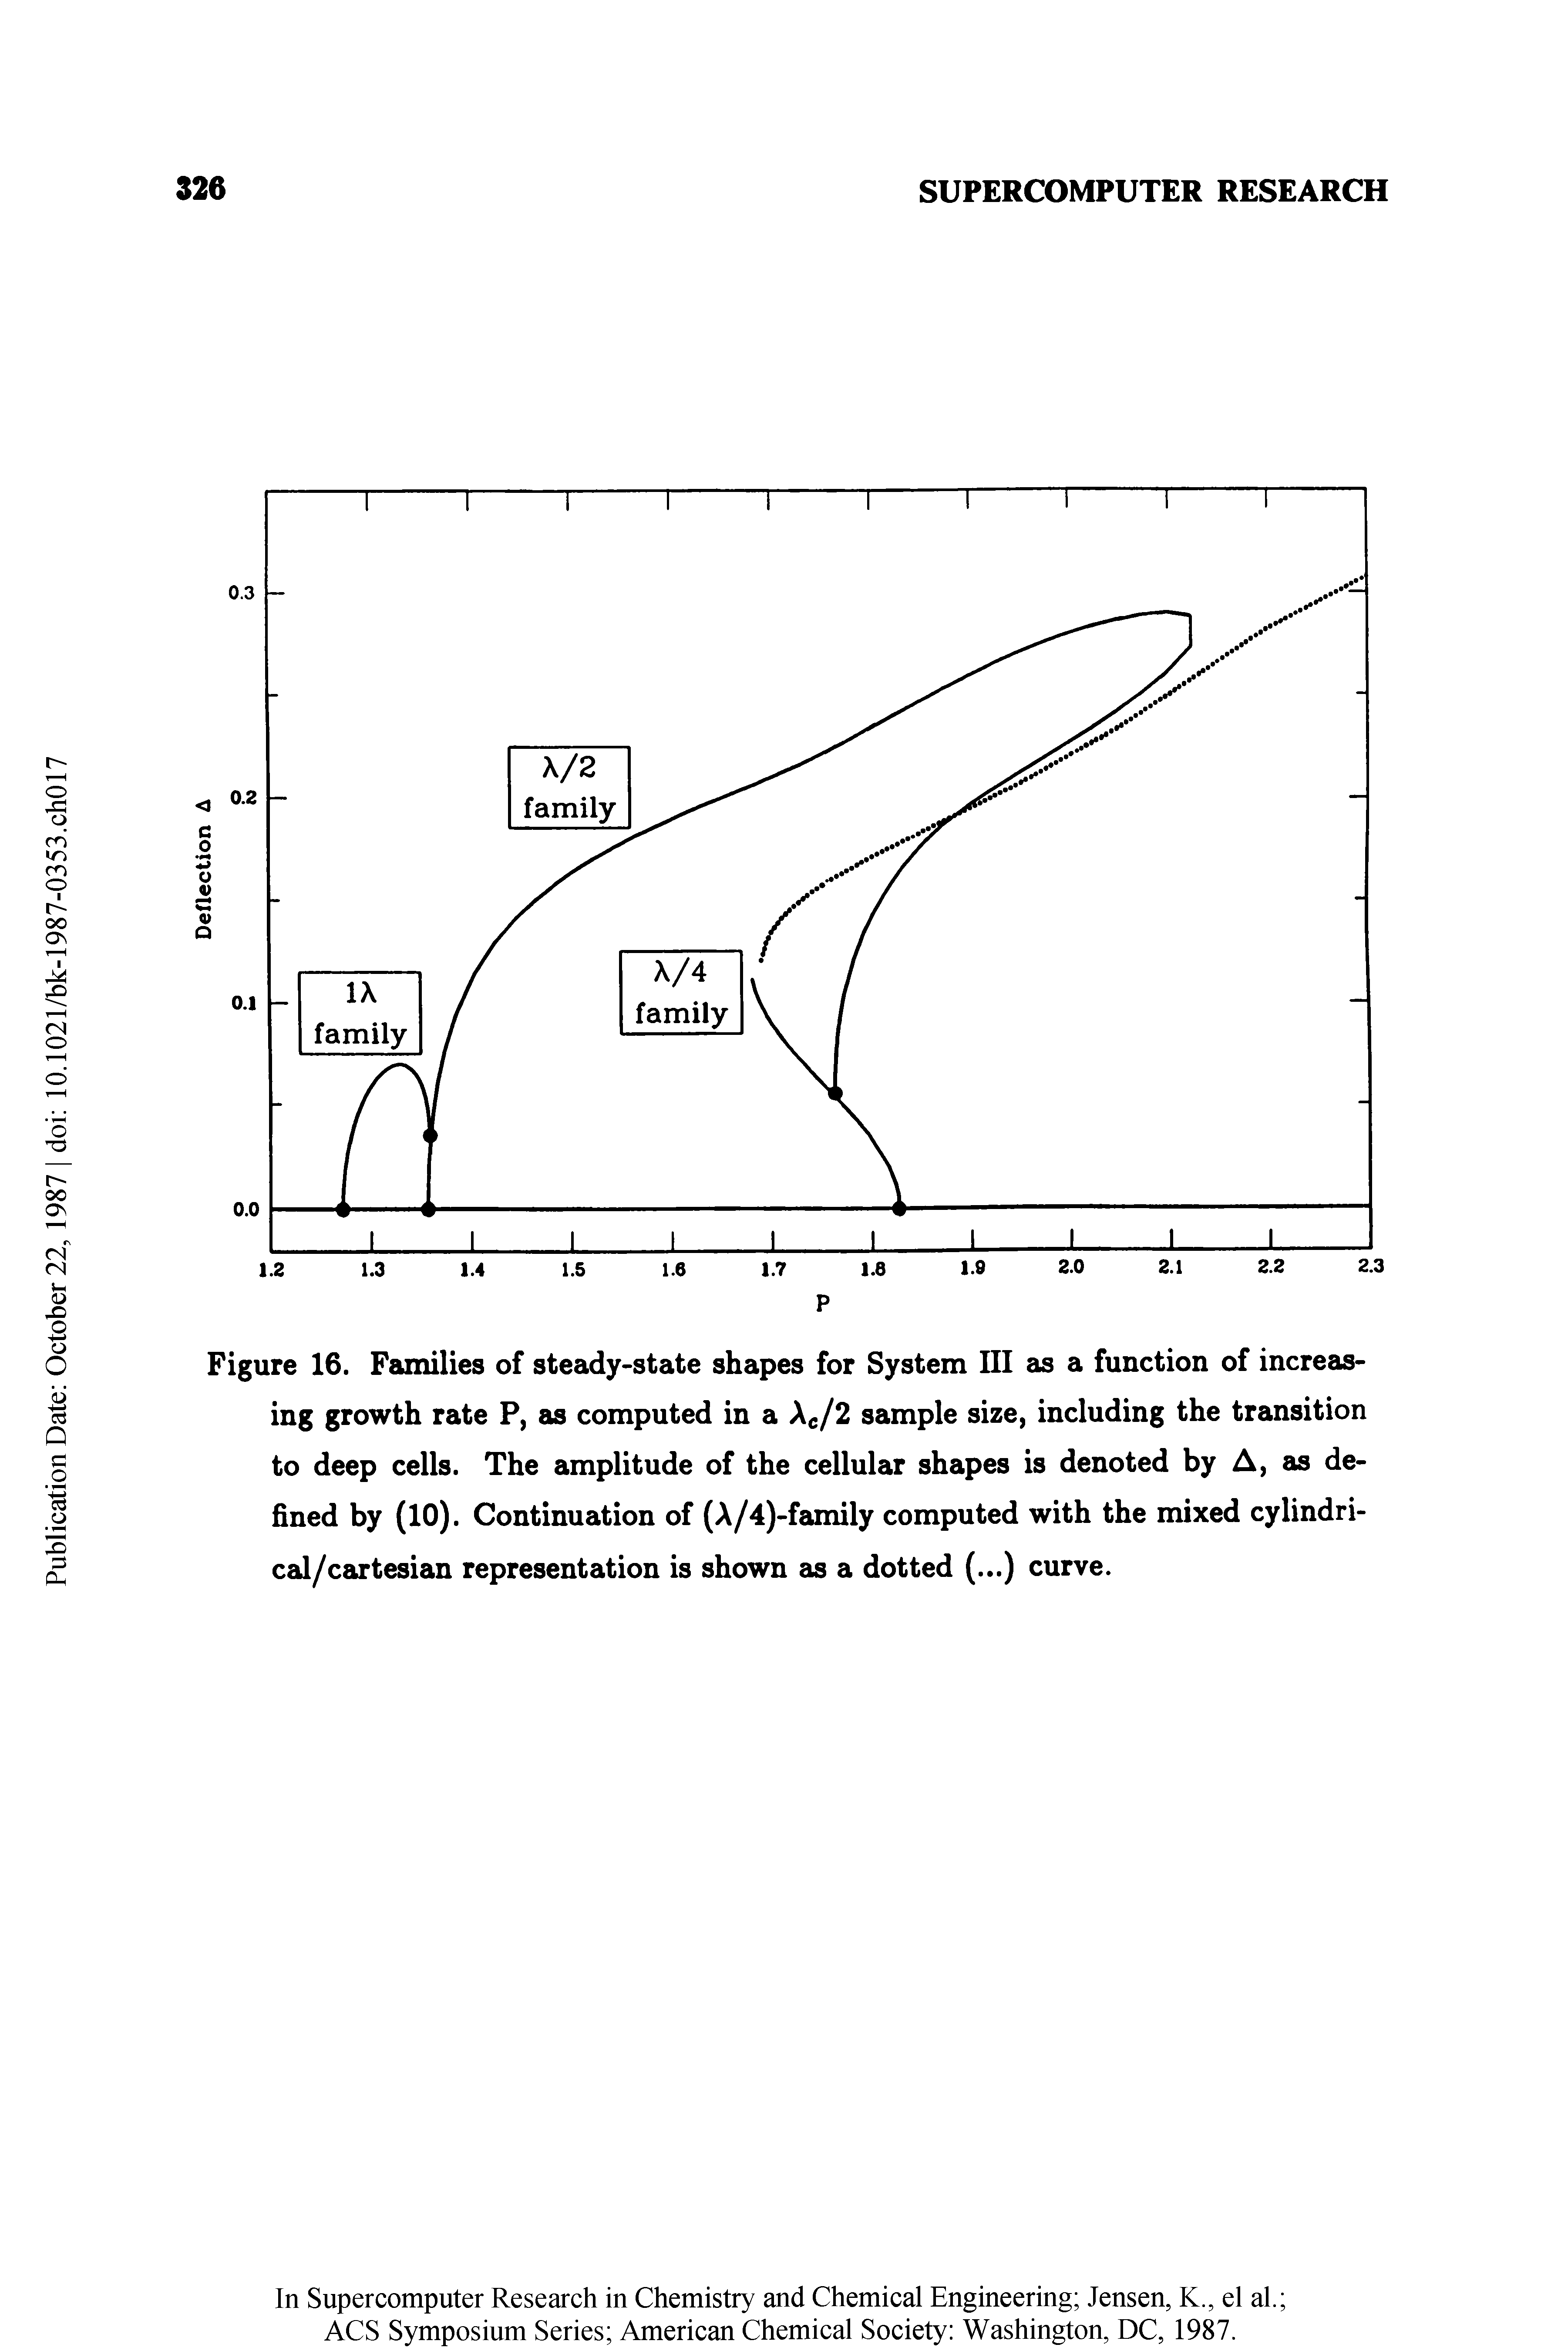 Figure 16. Families of steady-state shapes for System III os a function of incre2is-ing growth rate P, as computed in a Xe/2 sample size, including the transition to deep cells. The amplitude of the cellular shapes is denoted by A, as defined by (10). Continuation of (A/4)-family computed with the mixed cylindri-cal/cartesian representation is shown 2ls a dotted (...) curve.